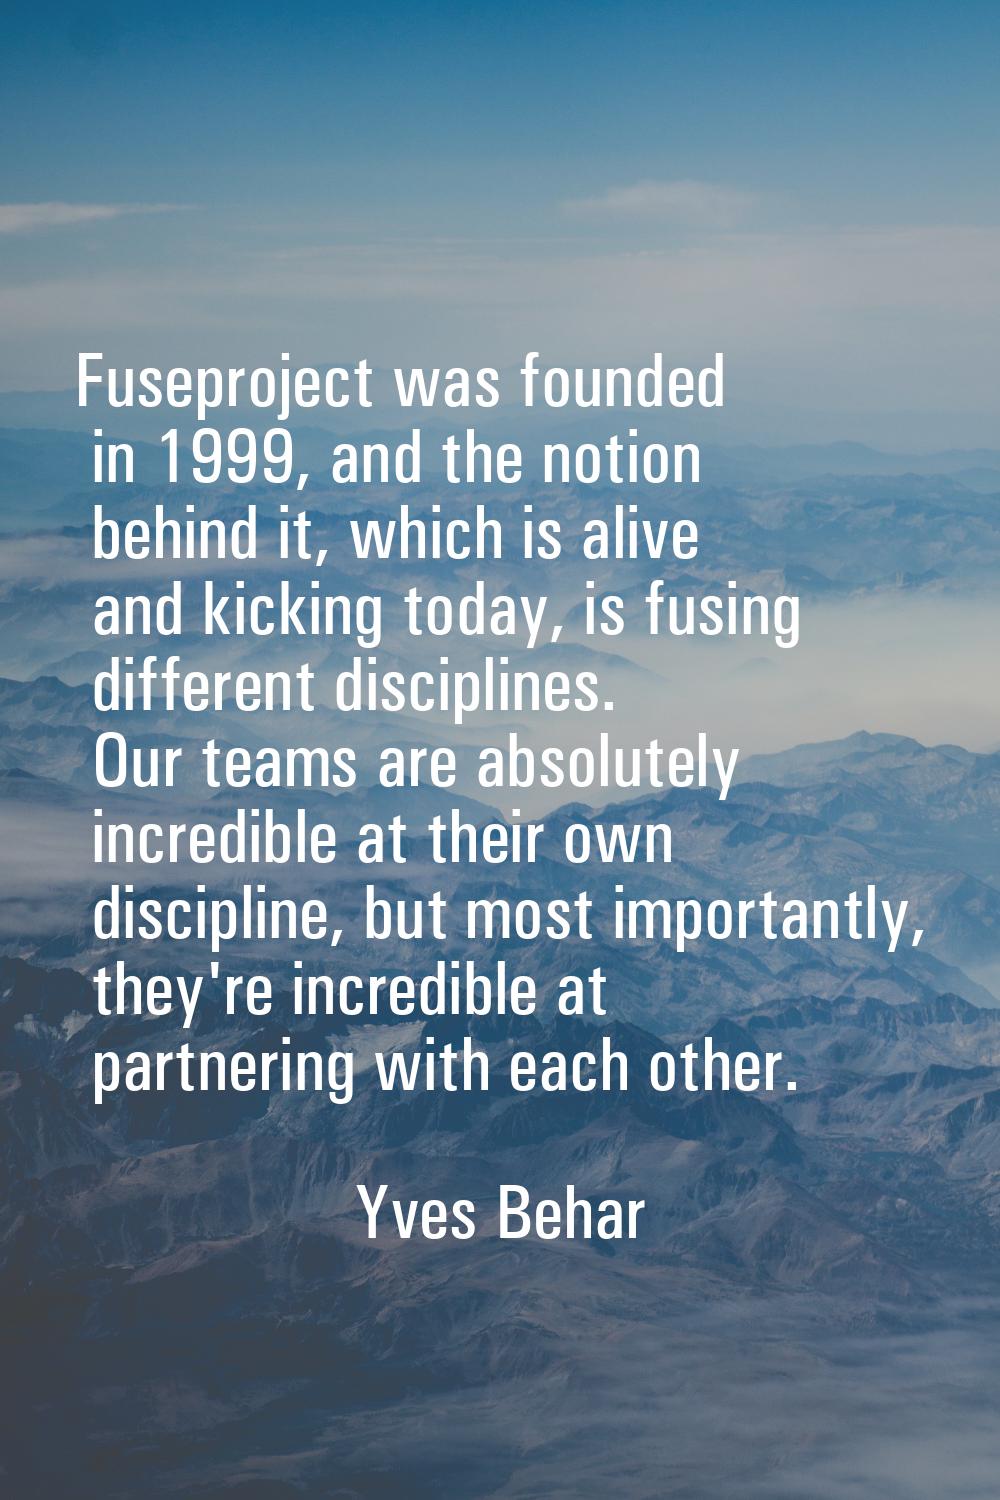 Fuseproject was founded in 1999, and the notion behind it, which is alive and kicking today, is fus